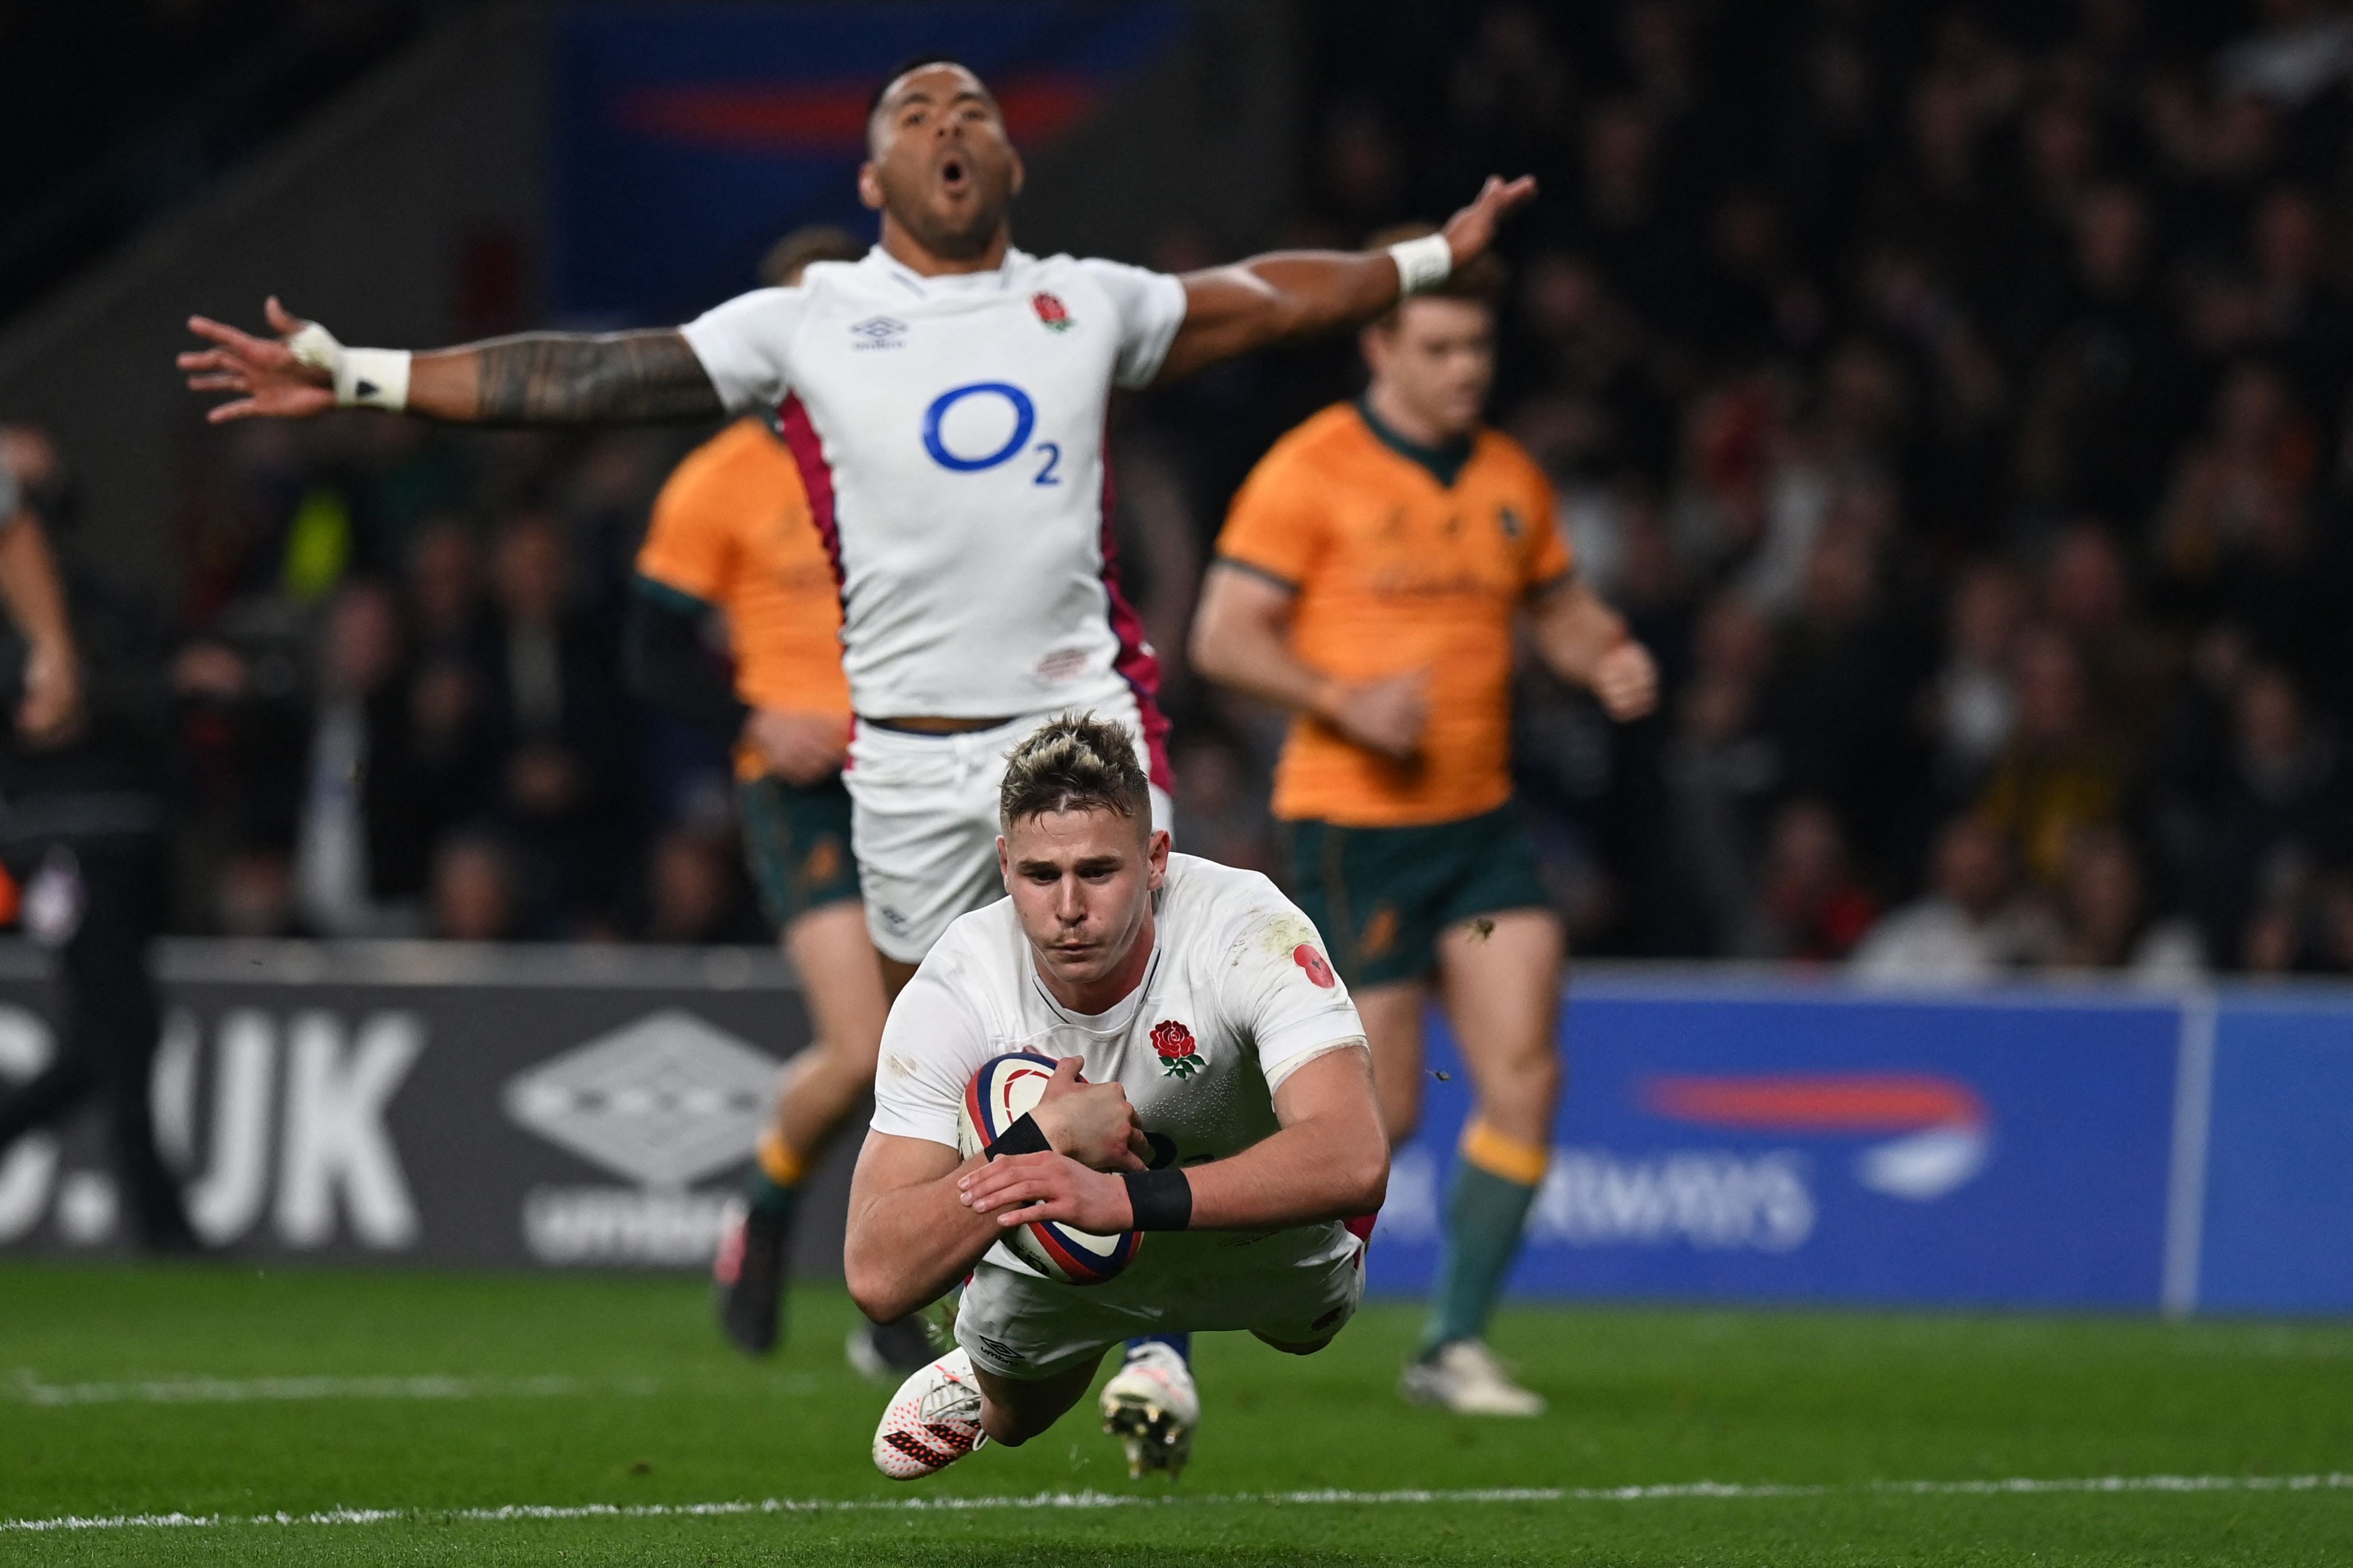 Steward dives over the line to score England’s opening try